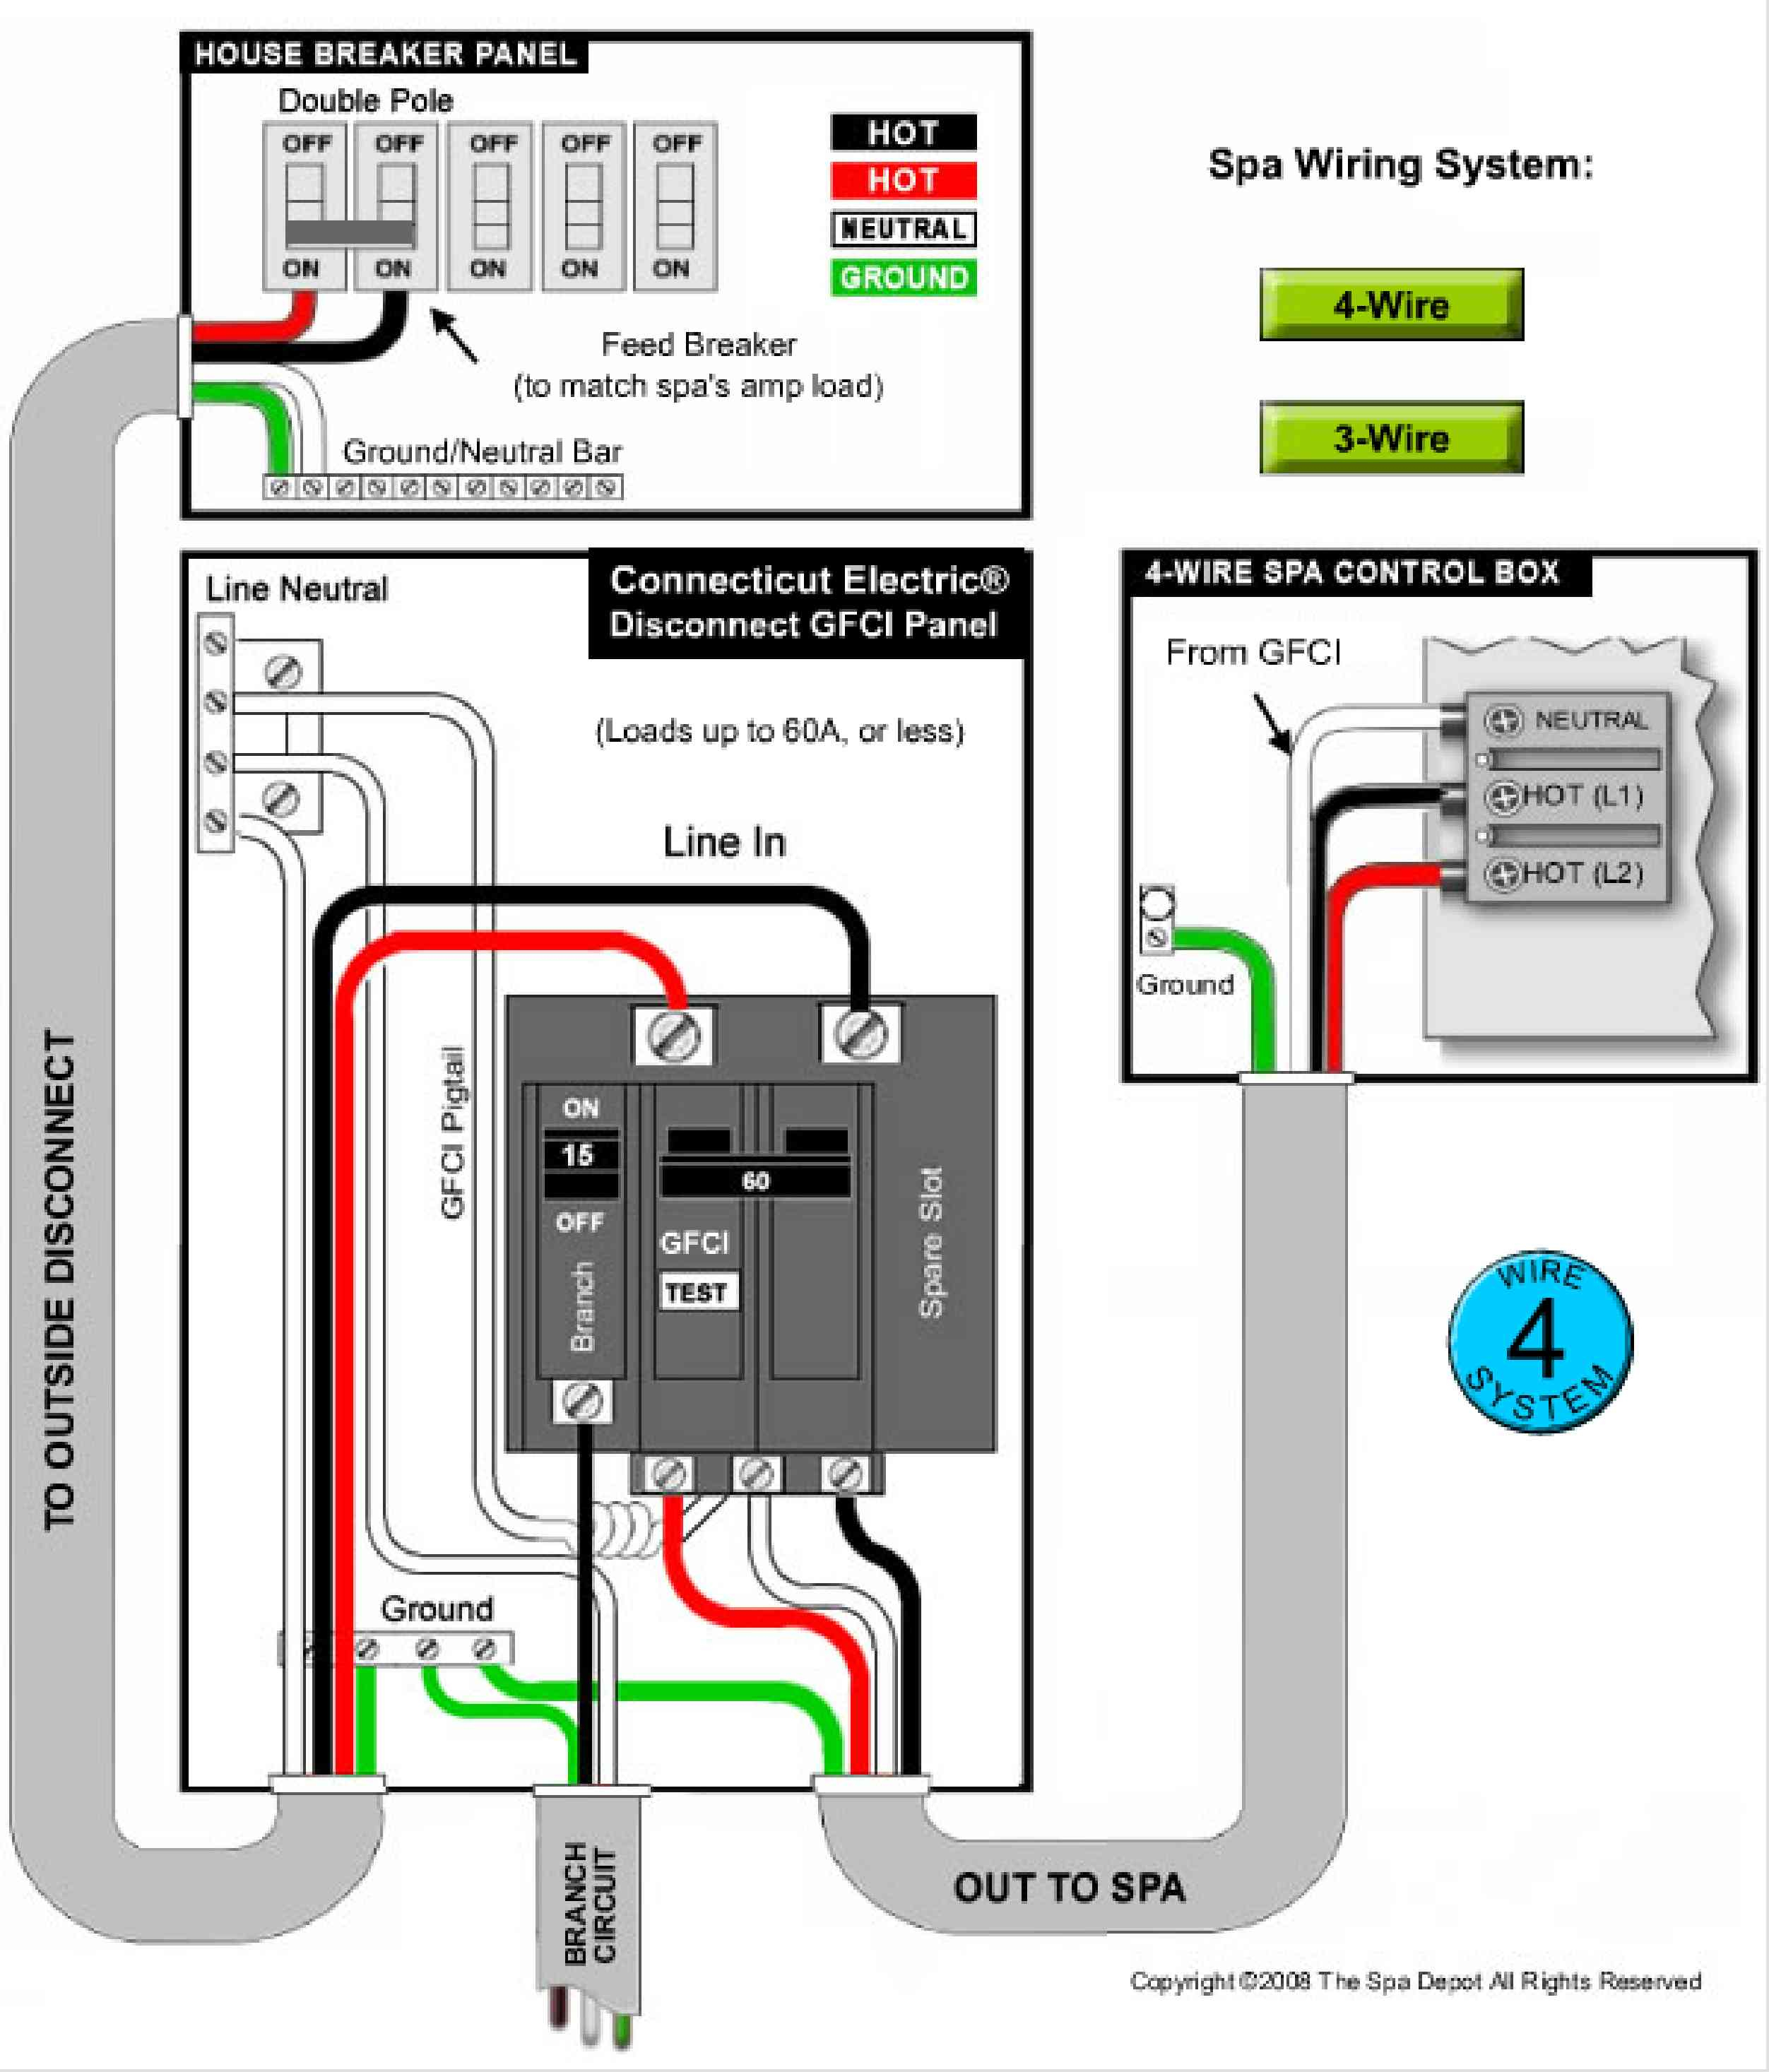 Double Pole Switch Wiring Diagram Lovely 16 5 | Hastalavista - Double Pole Switch Wiring Diagram